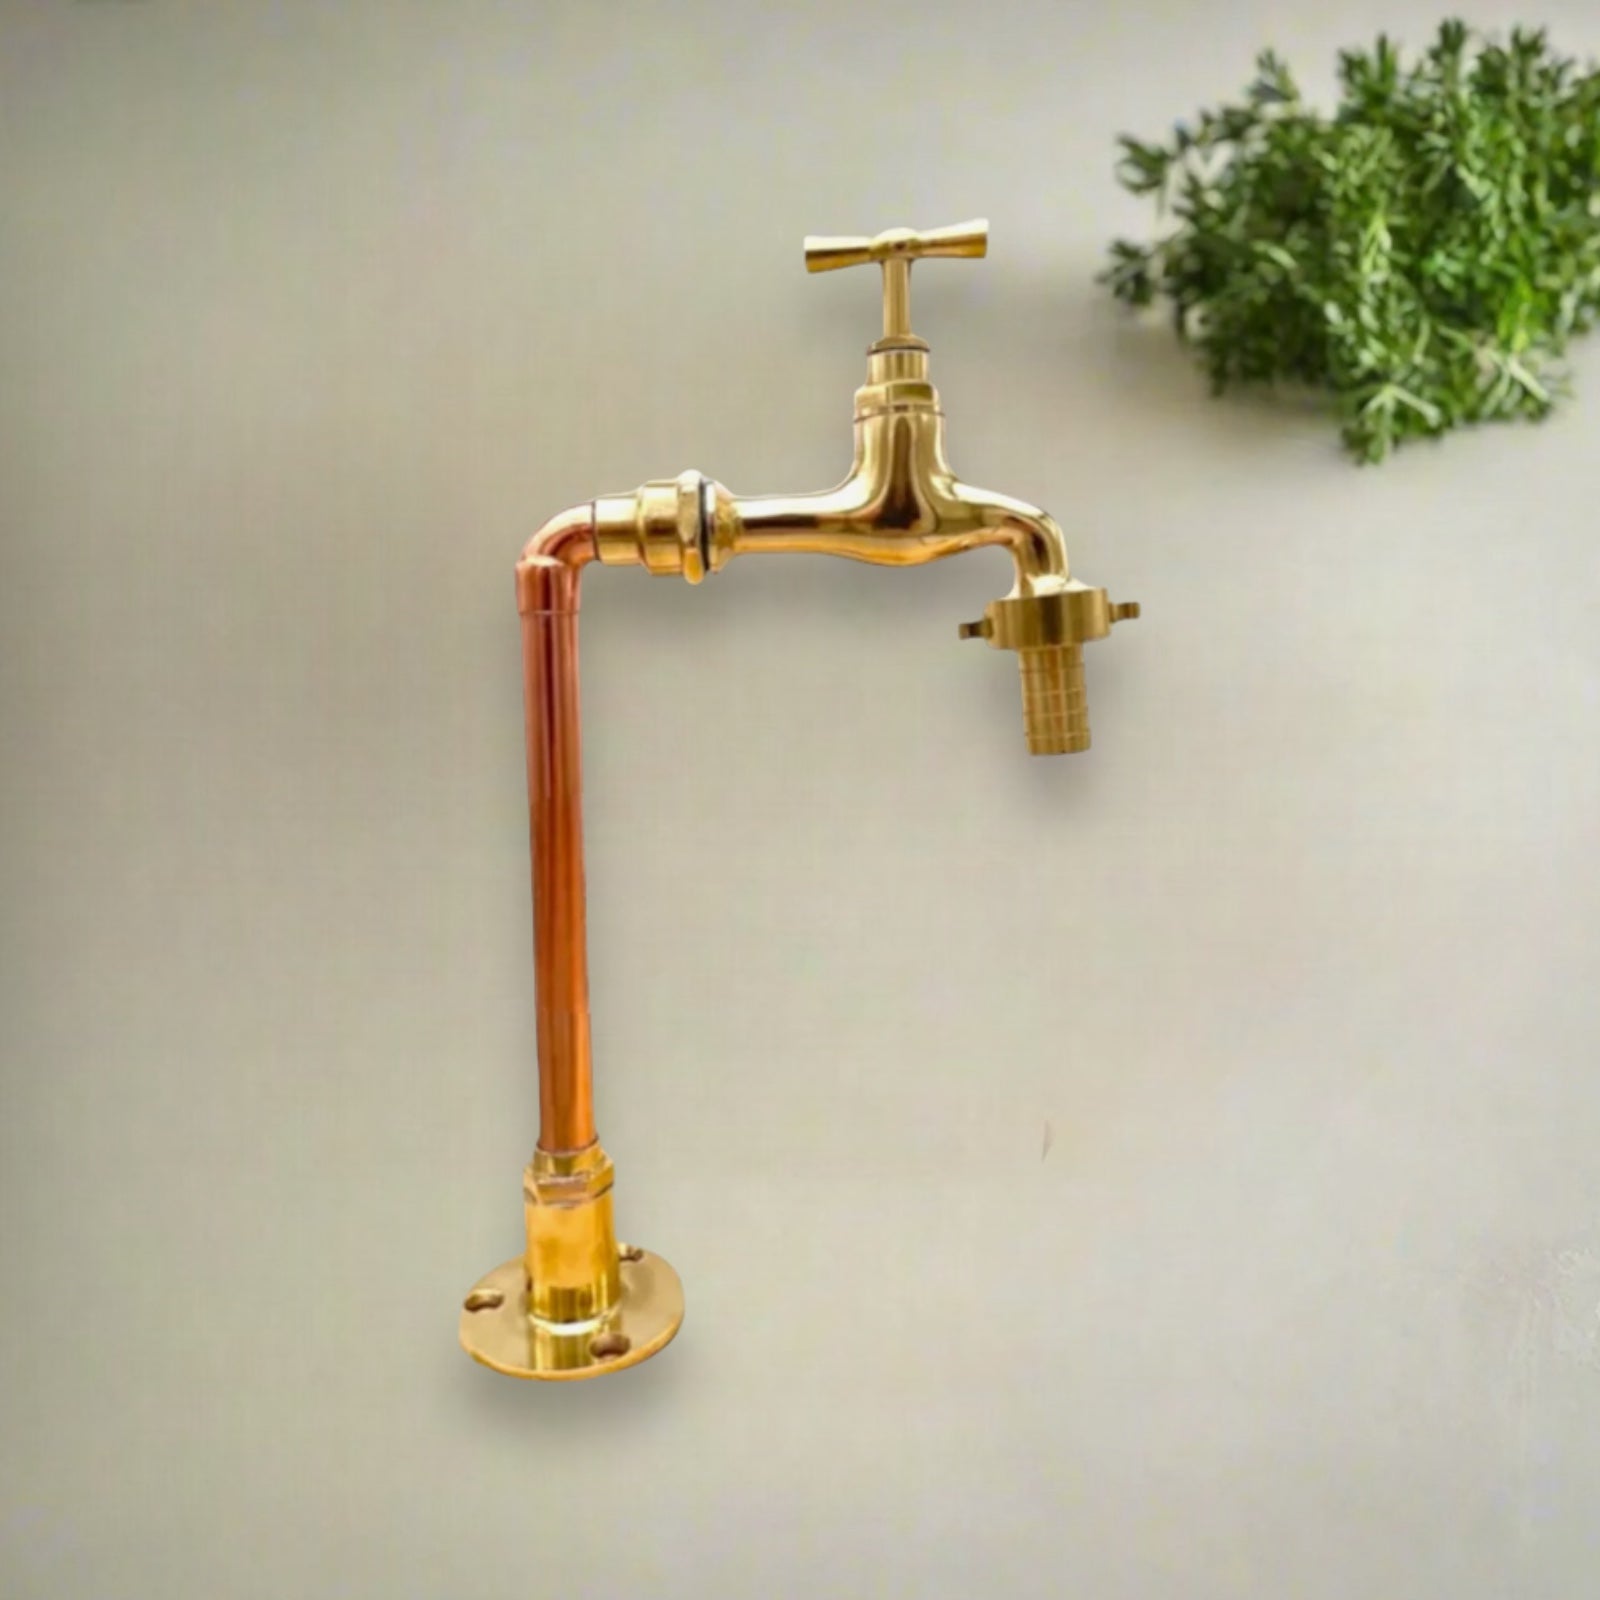 Traditional style copper and brass pillar kitchen Belfast sink tap sold by All Things French Store